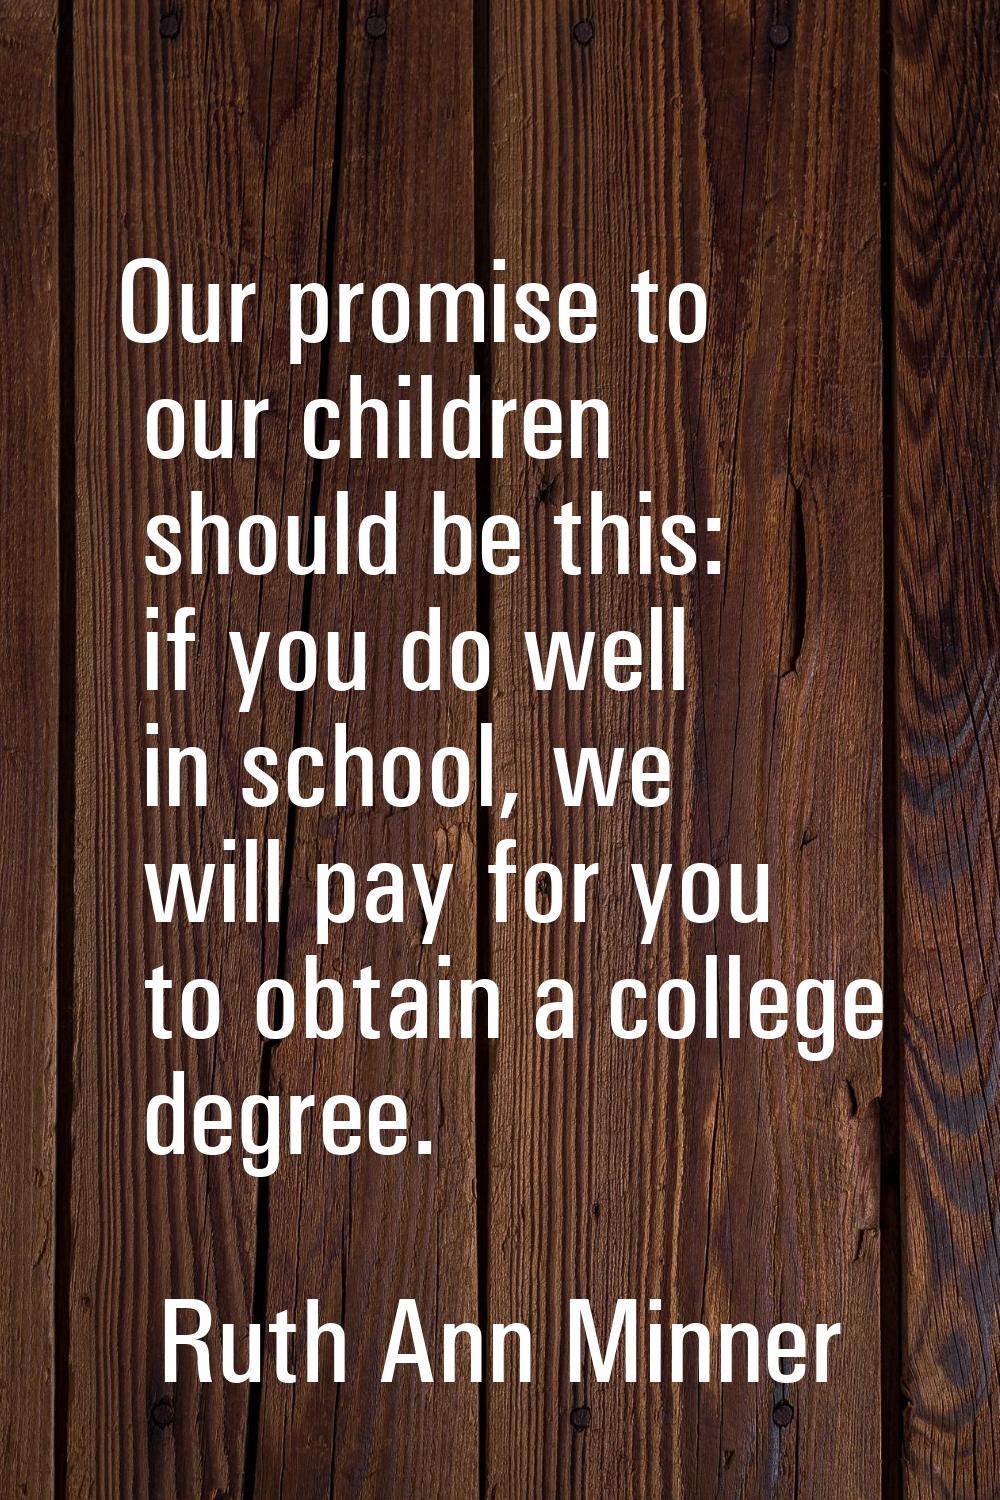 Our promise to our children should be this: if you do well in school, we will pay for you to obtain